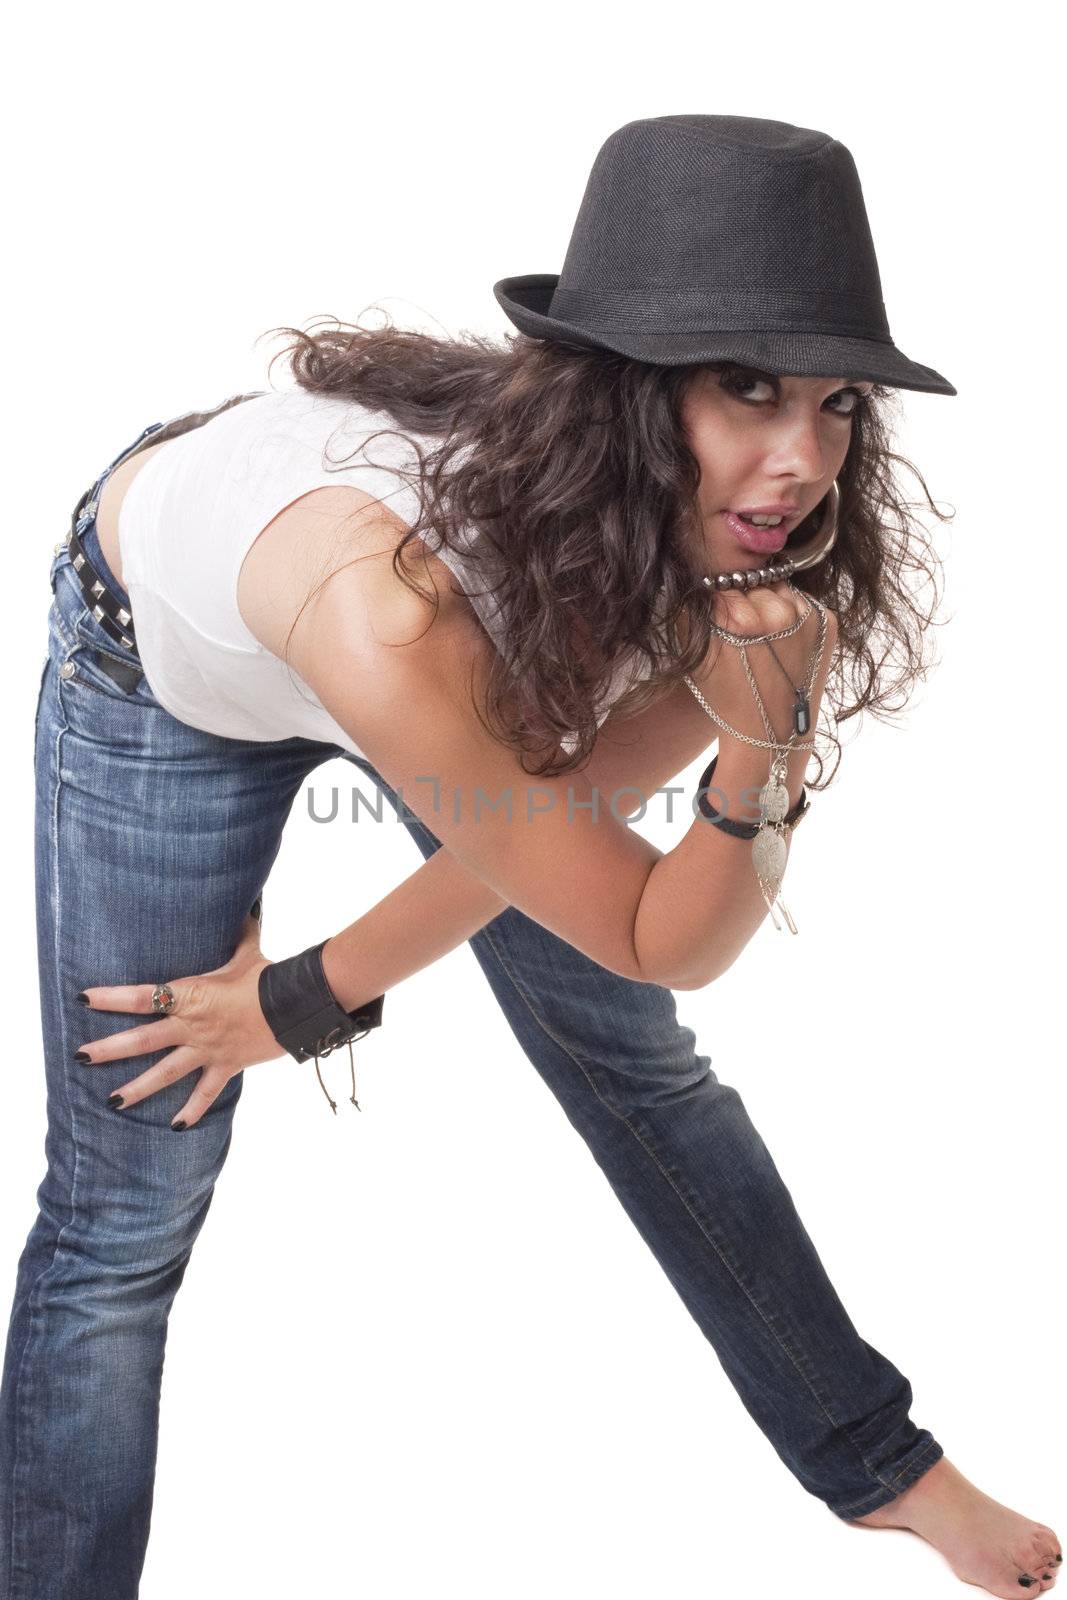 Young brunette girl posing for photo in funny position